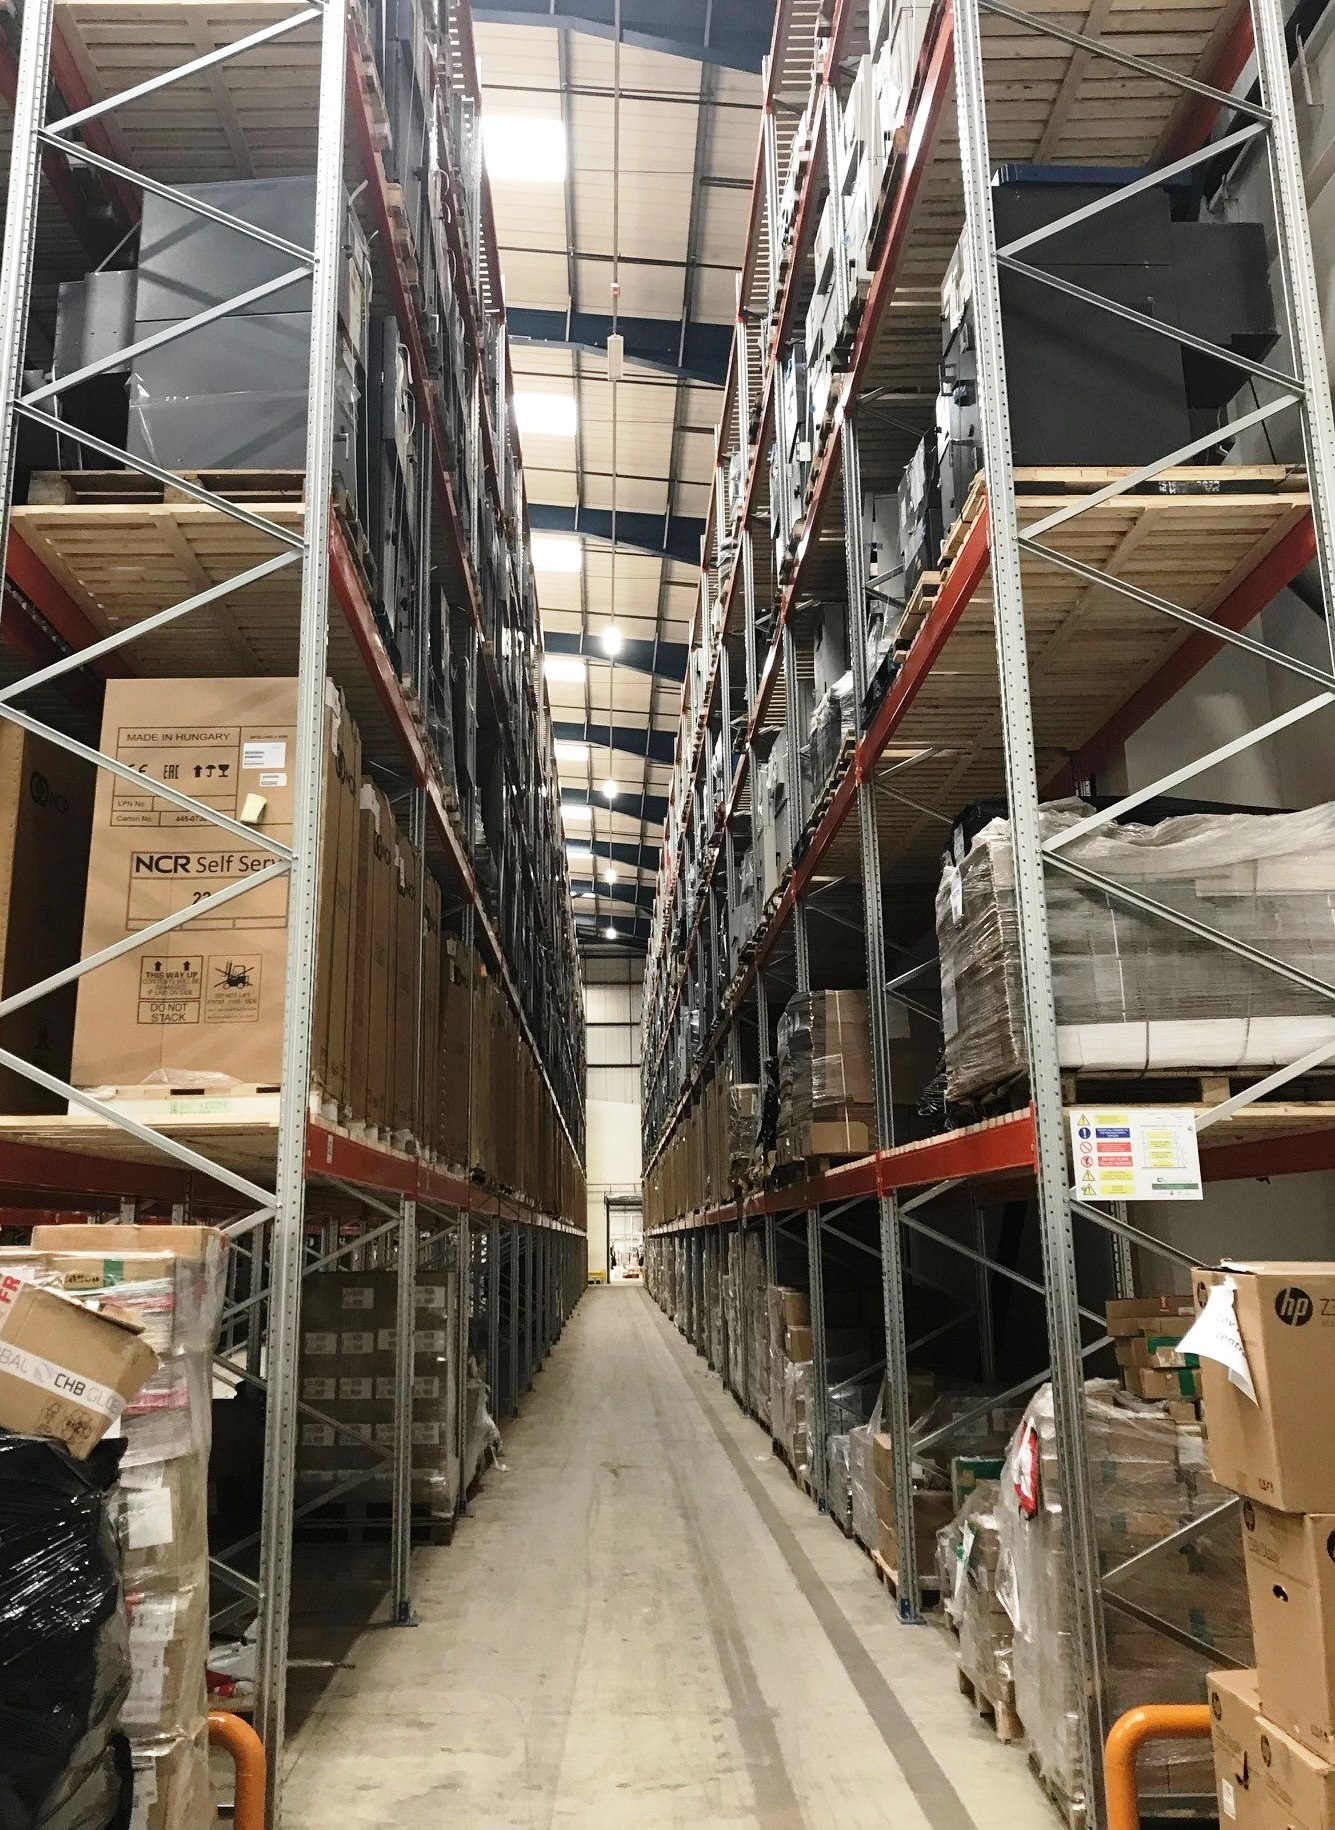 ECOLIGHTING CHOSEN BY TOP LOGISTICS PROVIDER AS BEST LED SOLUTION FOR NEW WAREHOUSE @Ecolightinguk